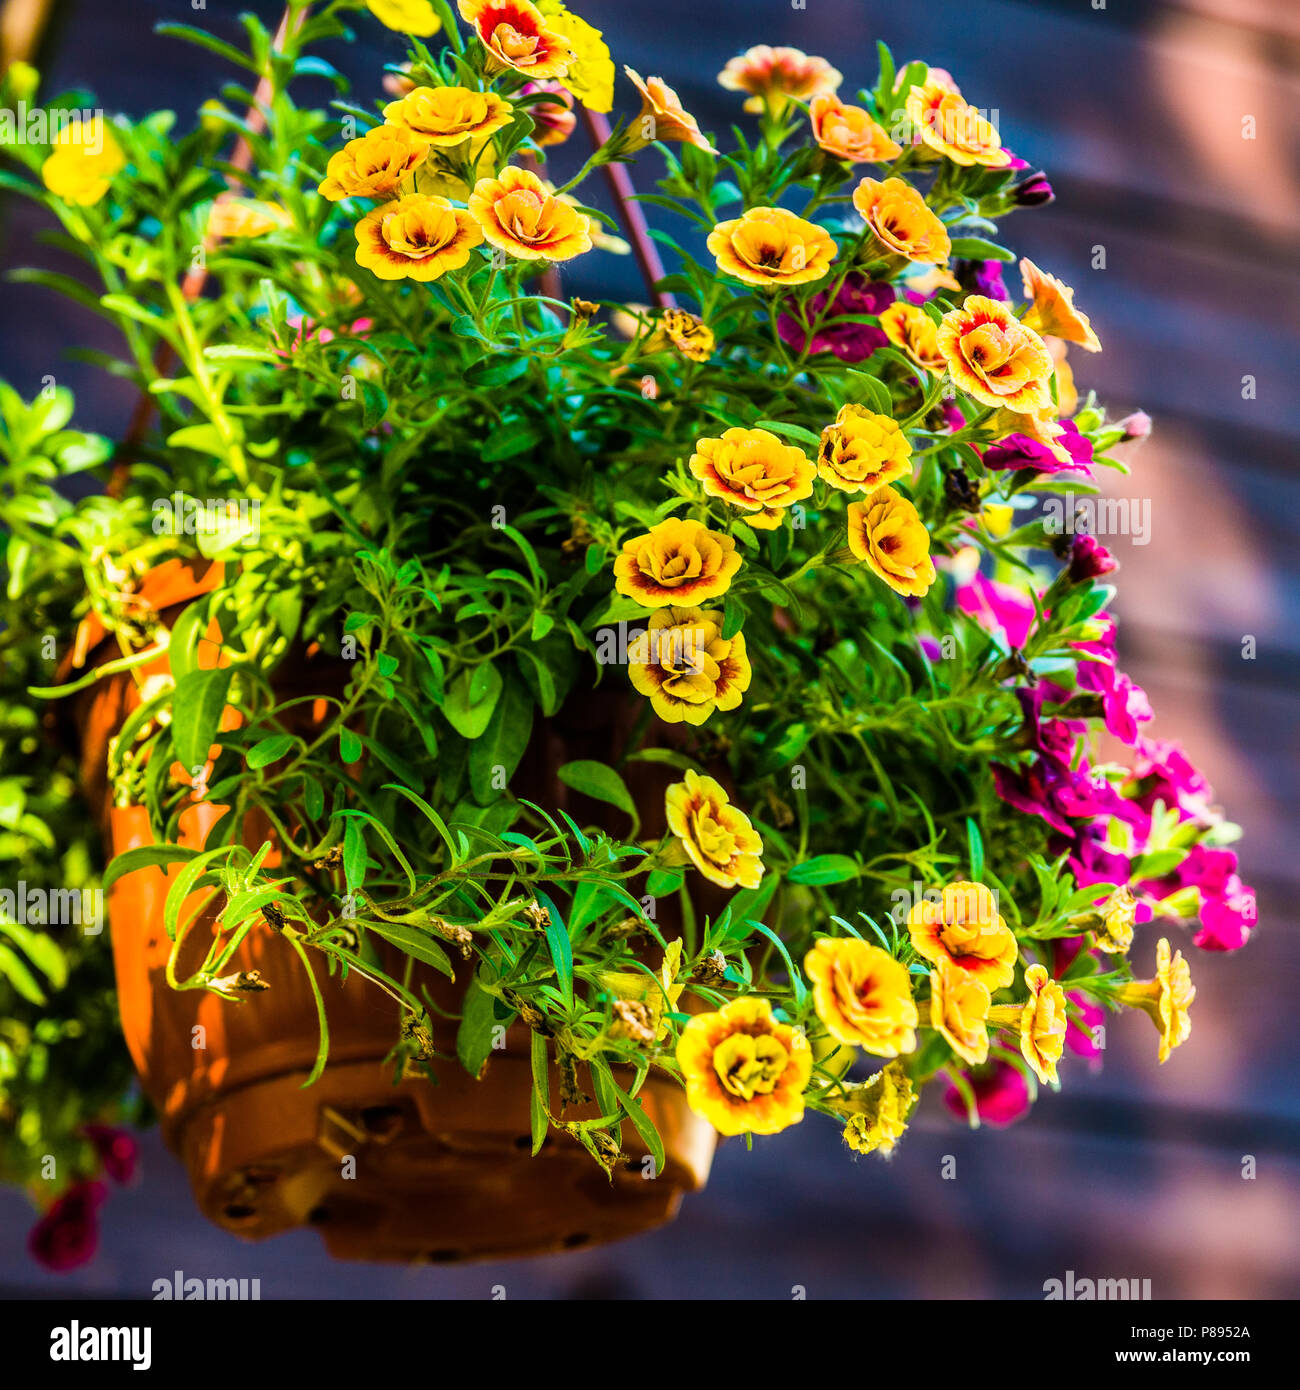 A ceramics pot full of yellow and purple decorative petunia flowers hangs on the wall. Play of light and shadow. Summer evening light. Stock Photo